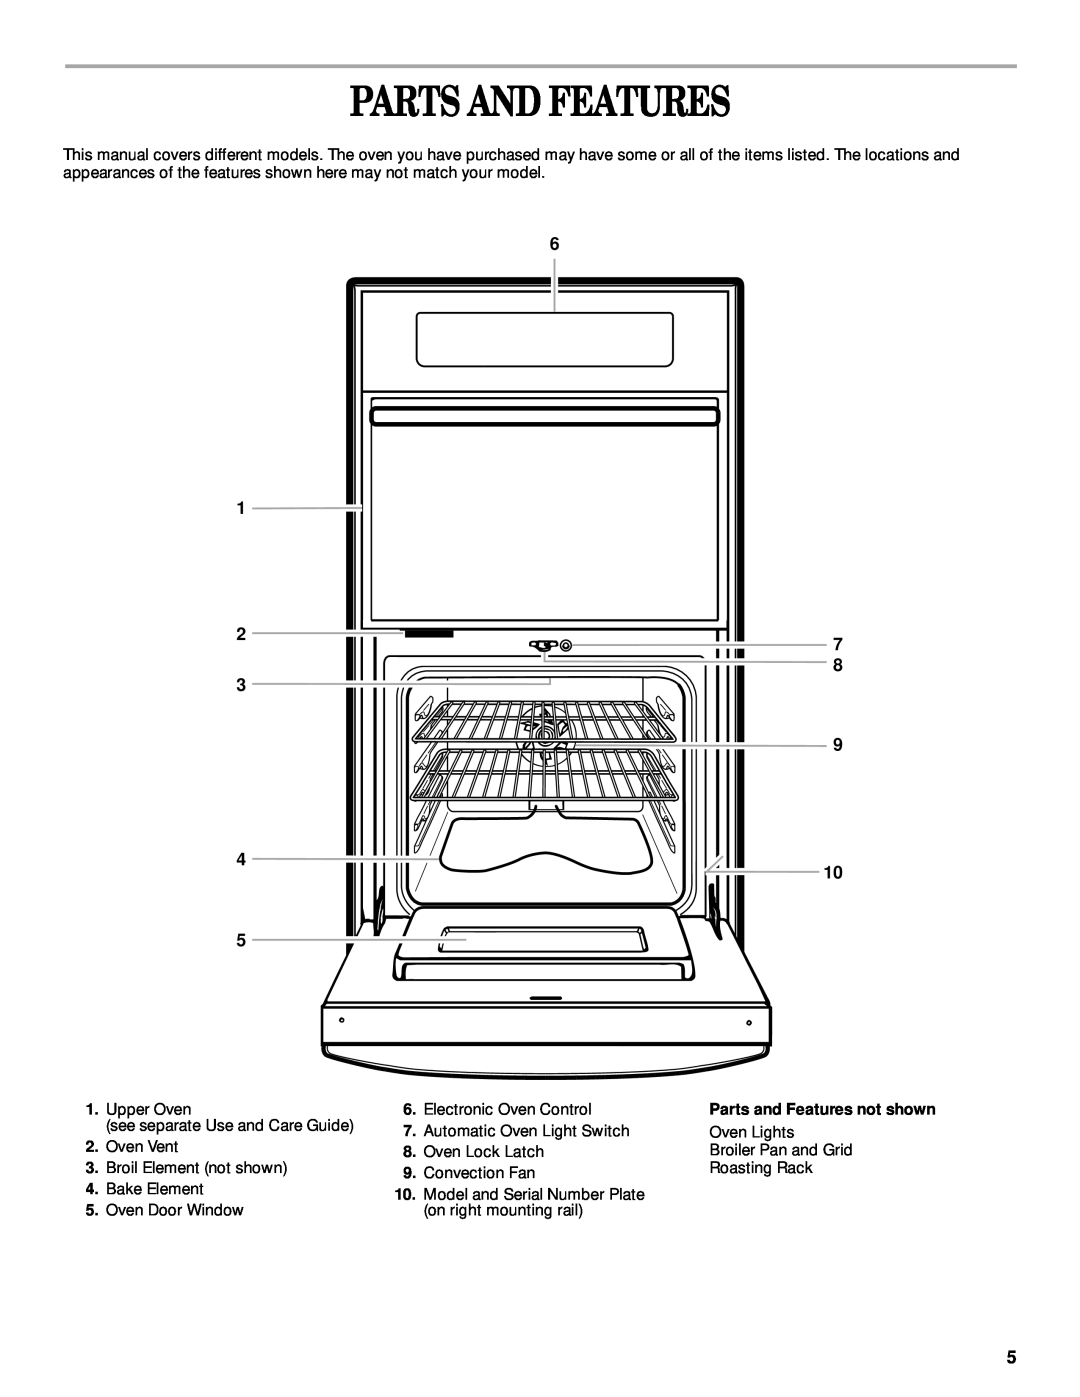 Whirlpool GSC278 manual Parts And Features, Parts and Features not shown 